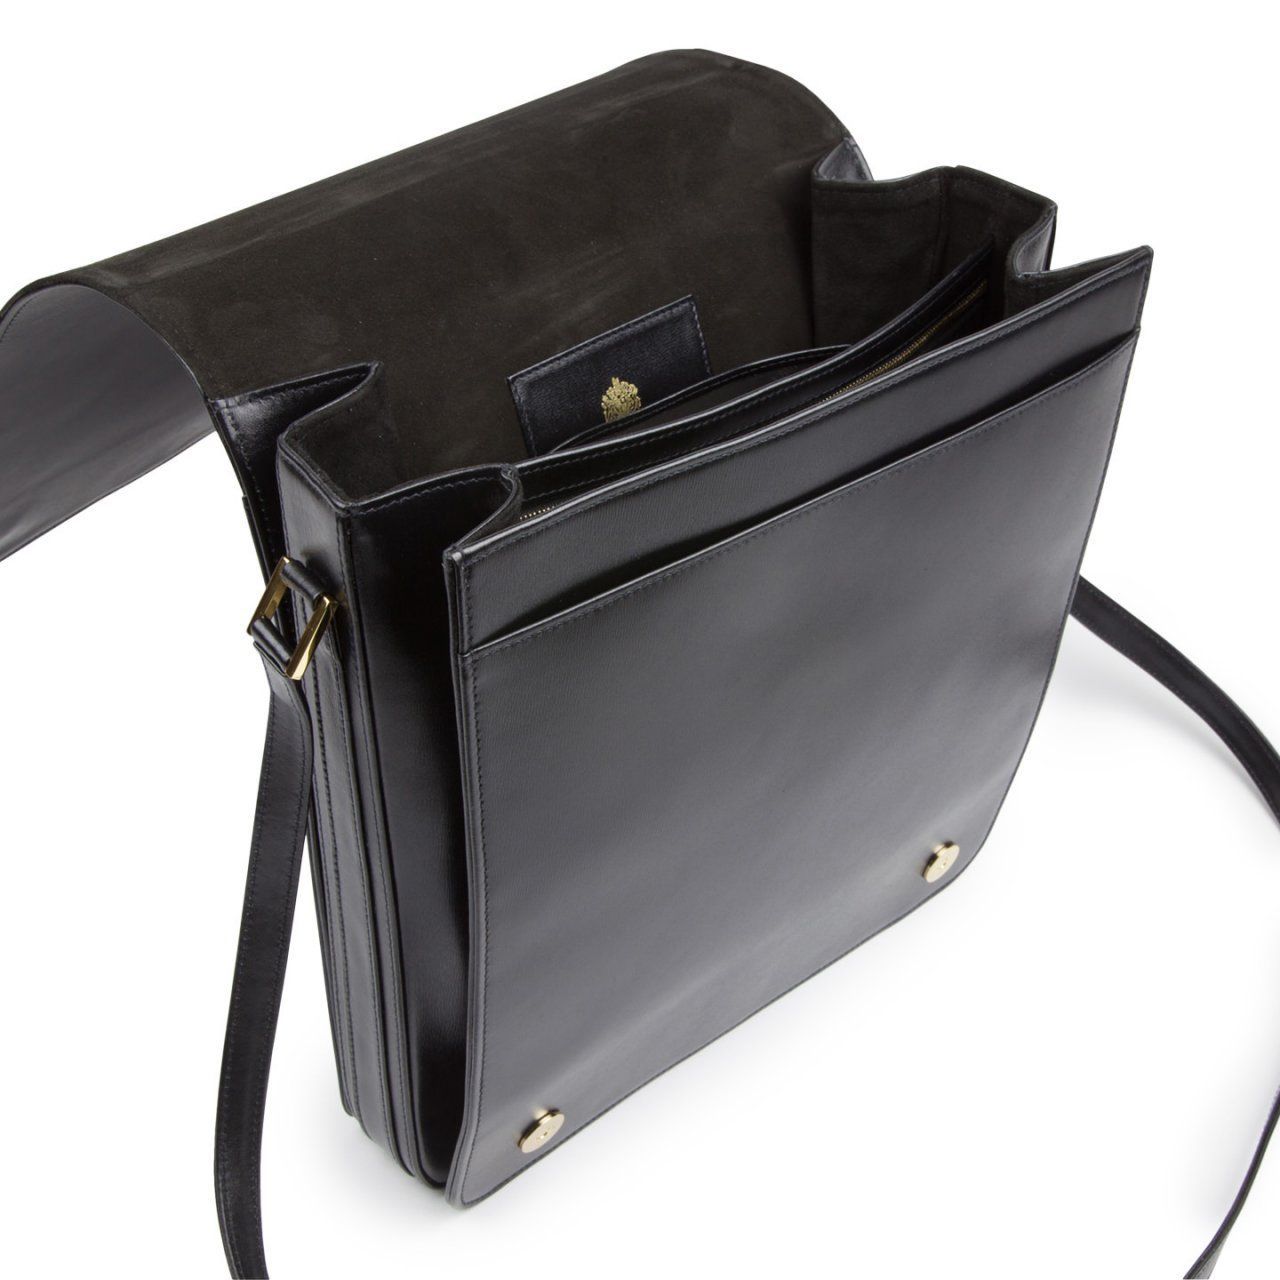 Welcome to Launer London – Luxury handbags and small leather goods